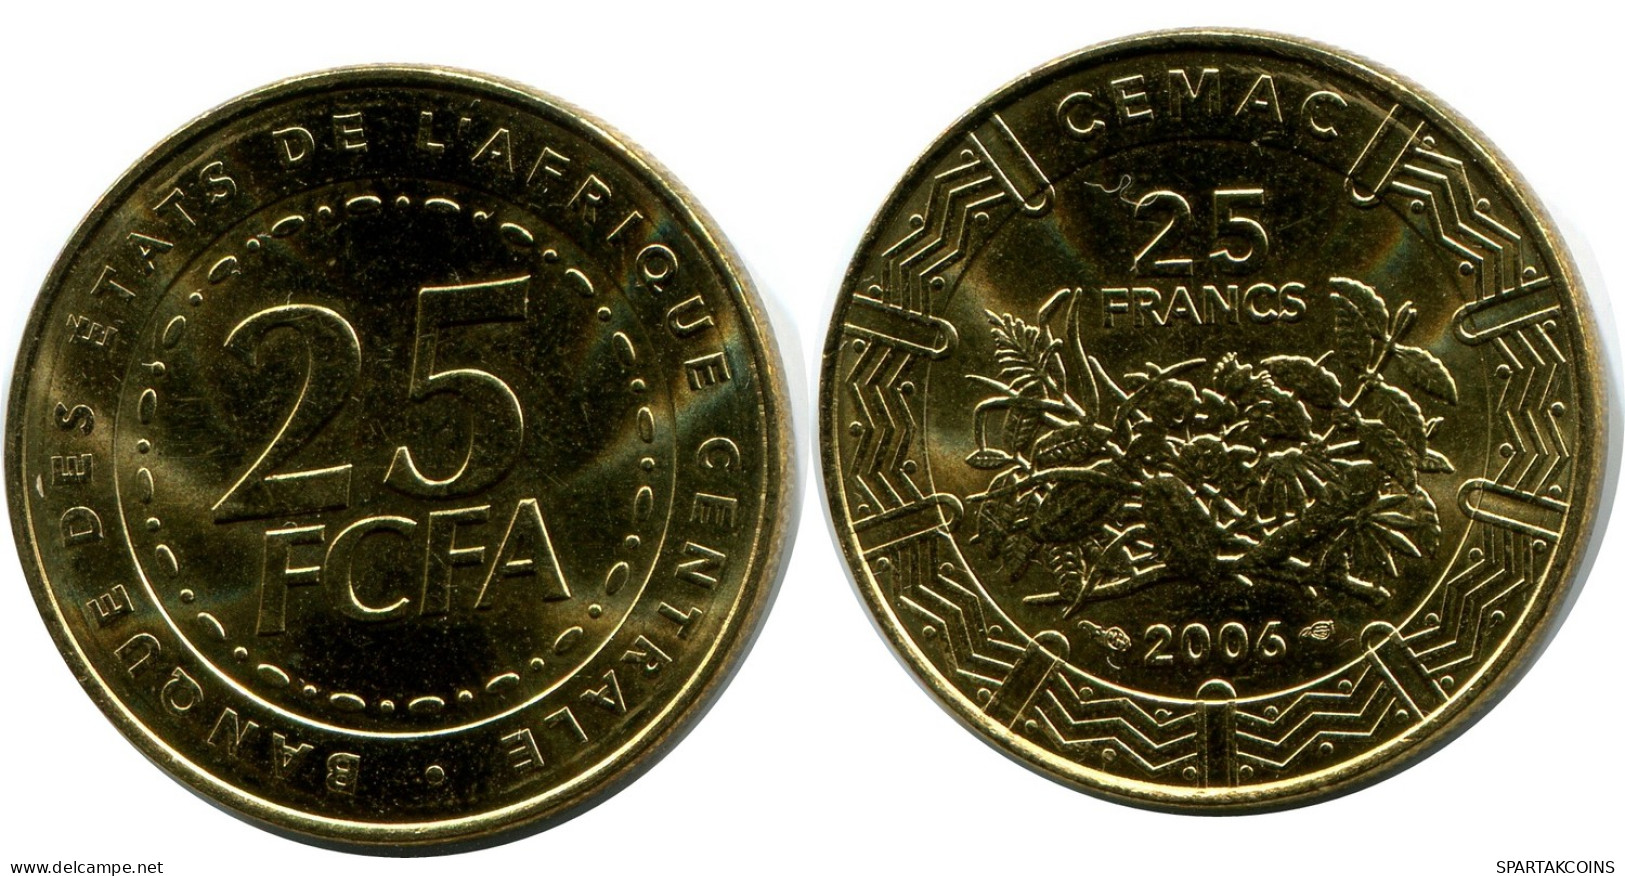 25 FRANCS CFA 2006 CENTRAL AFRICAN STATES (BEAC) Coin #AP863.U - Centraal-Afrikaanse Republiek